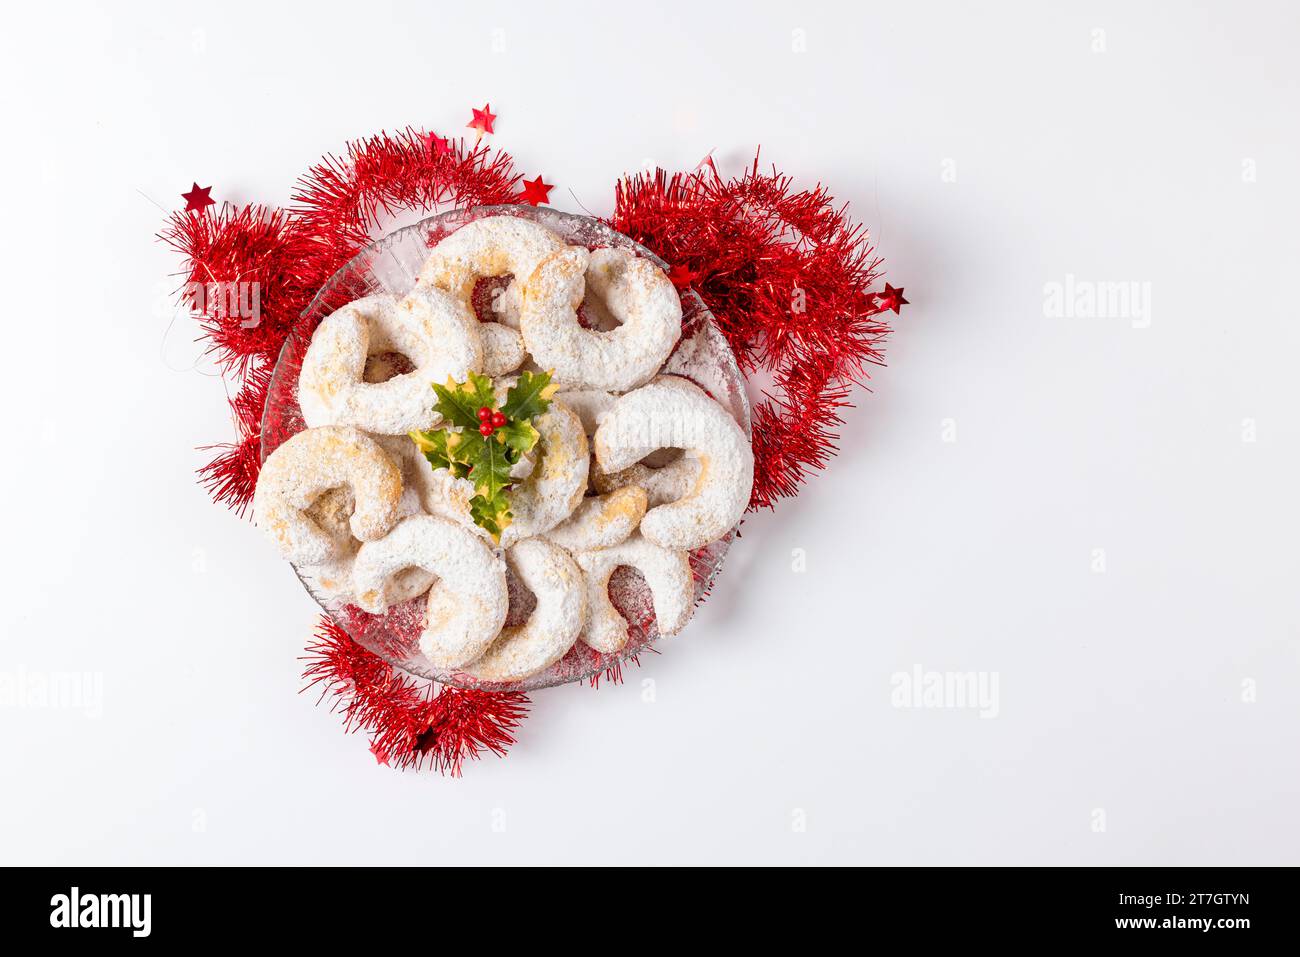 Glass plate with vanilla crescents, Christmas biscuits, Christmas decoration, white background, copy room Stock Photo